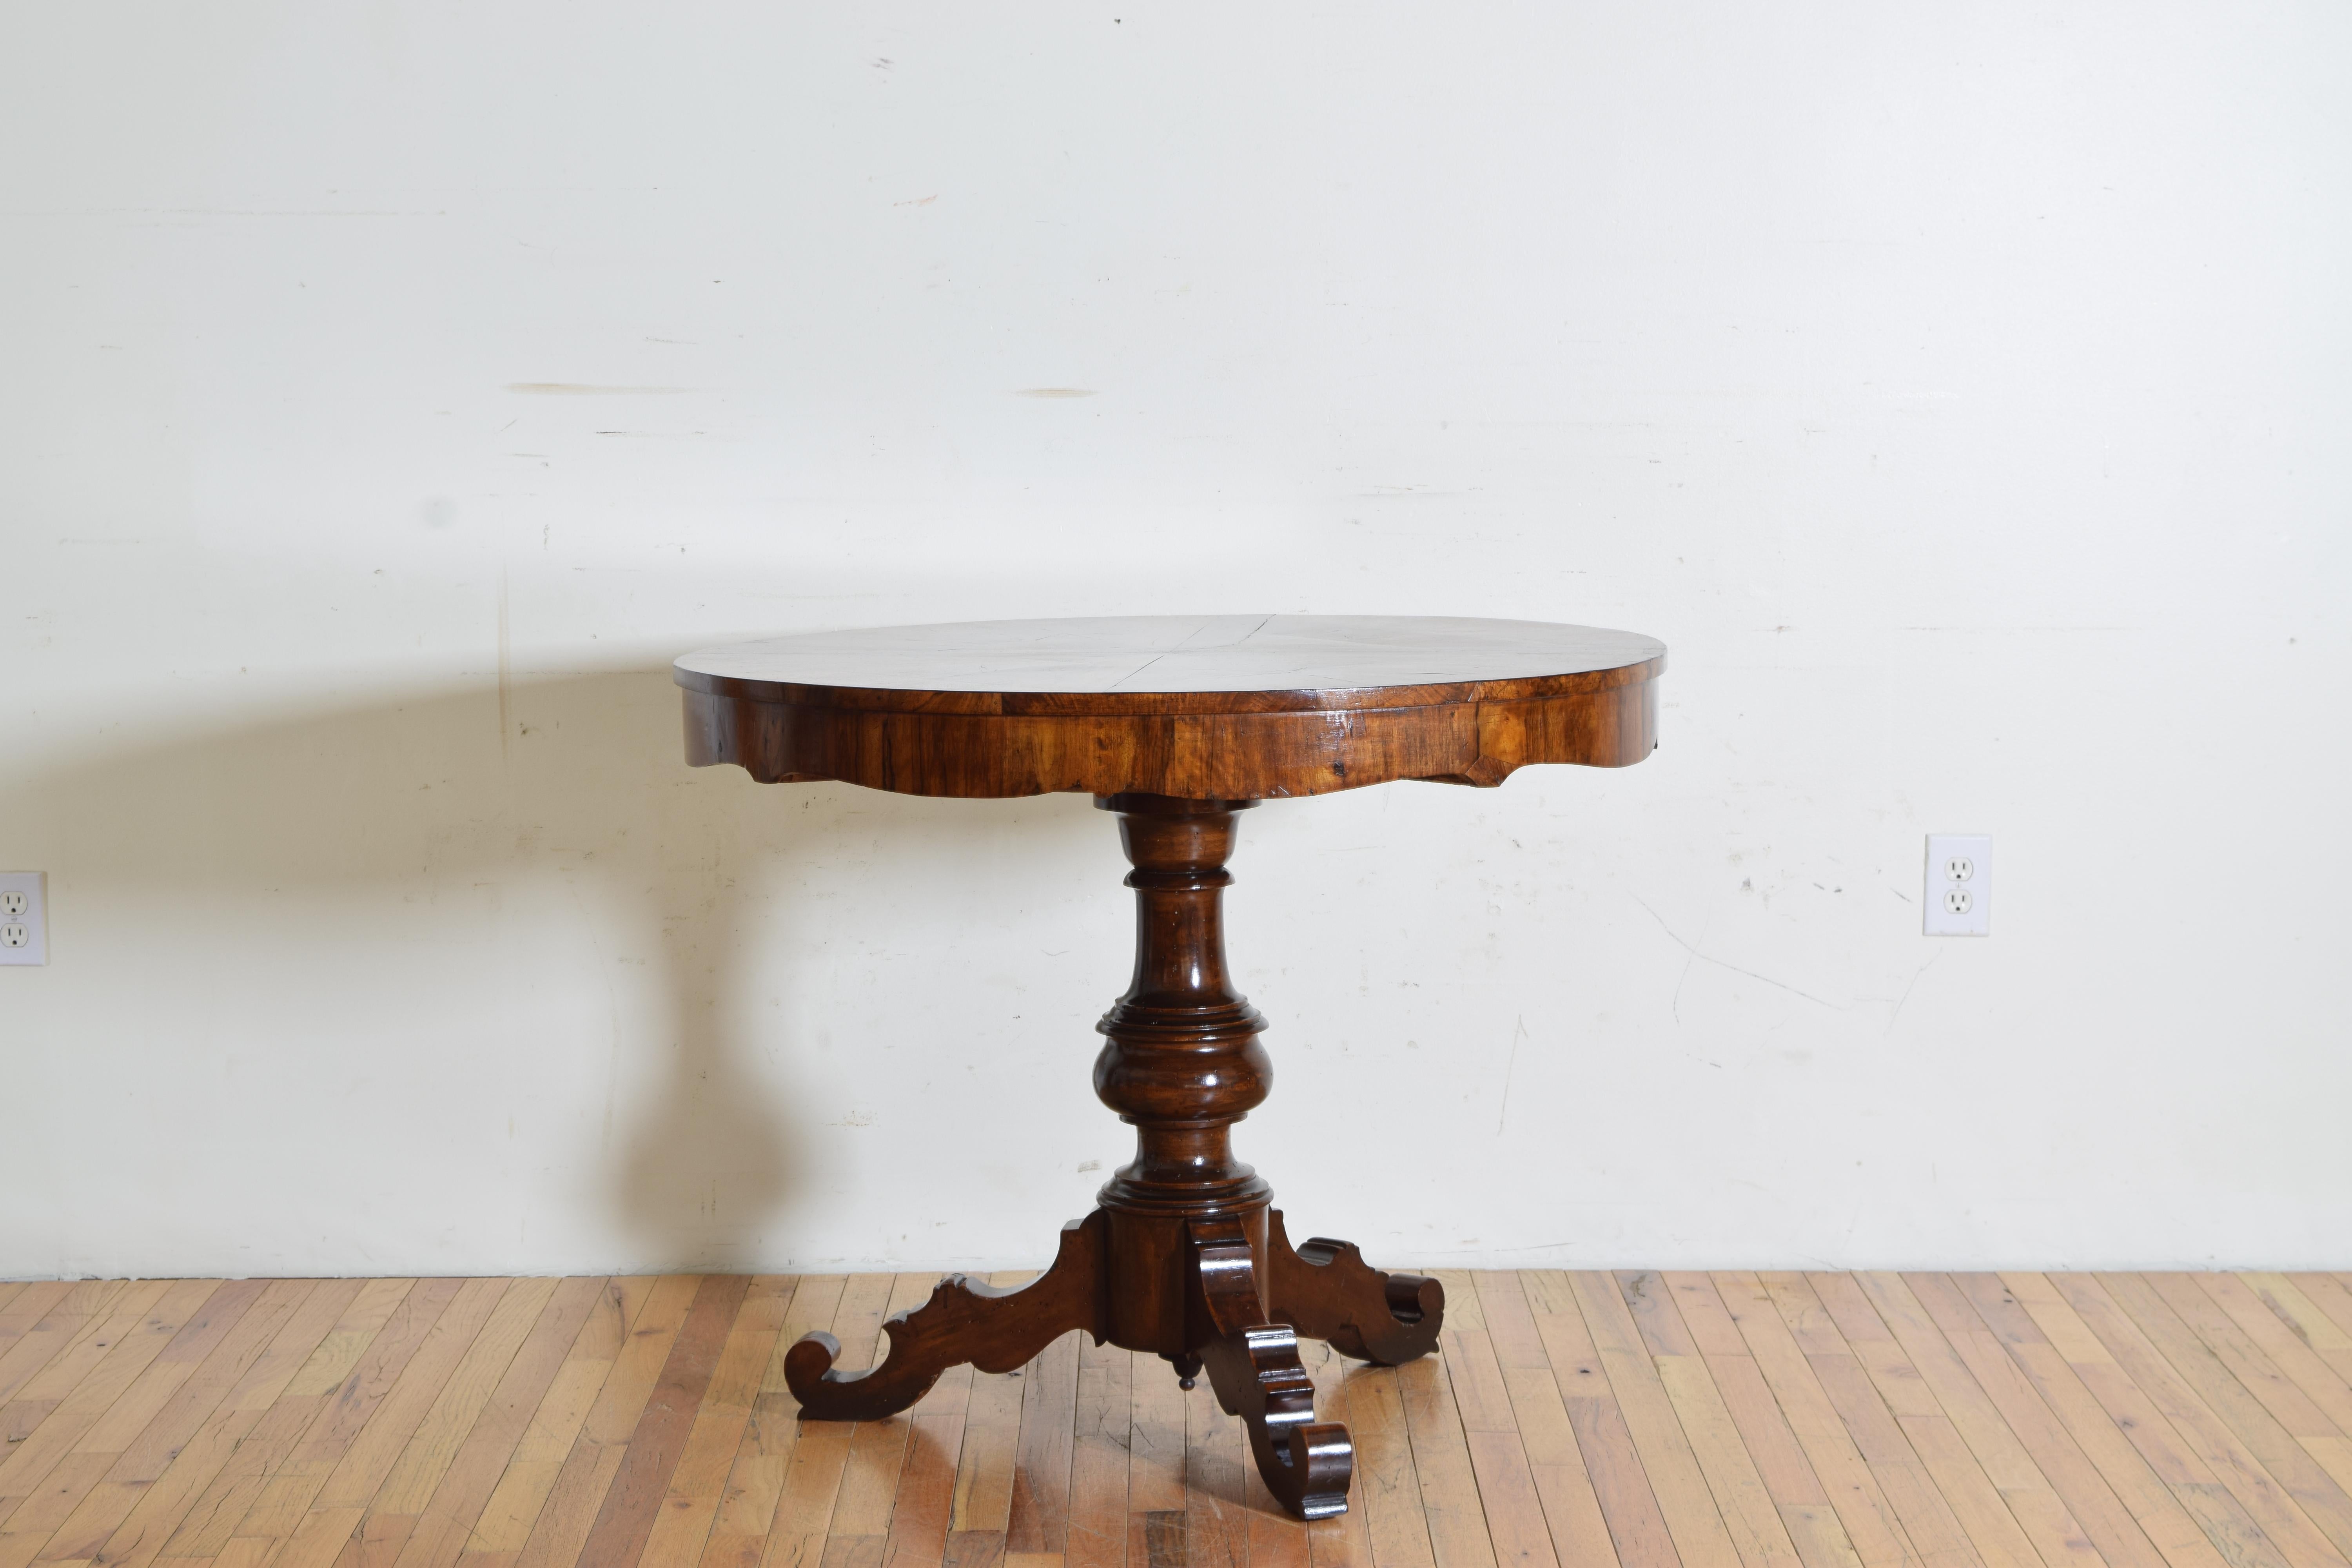 The round top veneered in 12 triangular shaped bookmatched panels joined to form a star-like pattern, the top sits atop a shaped apron also covered in walnut veneer, raised on a boldly turned standard atop a round base issuing three shaped legs with